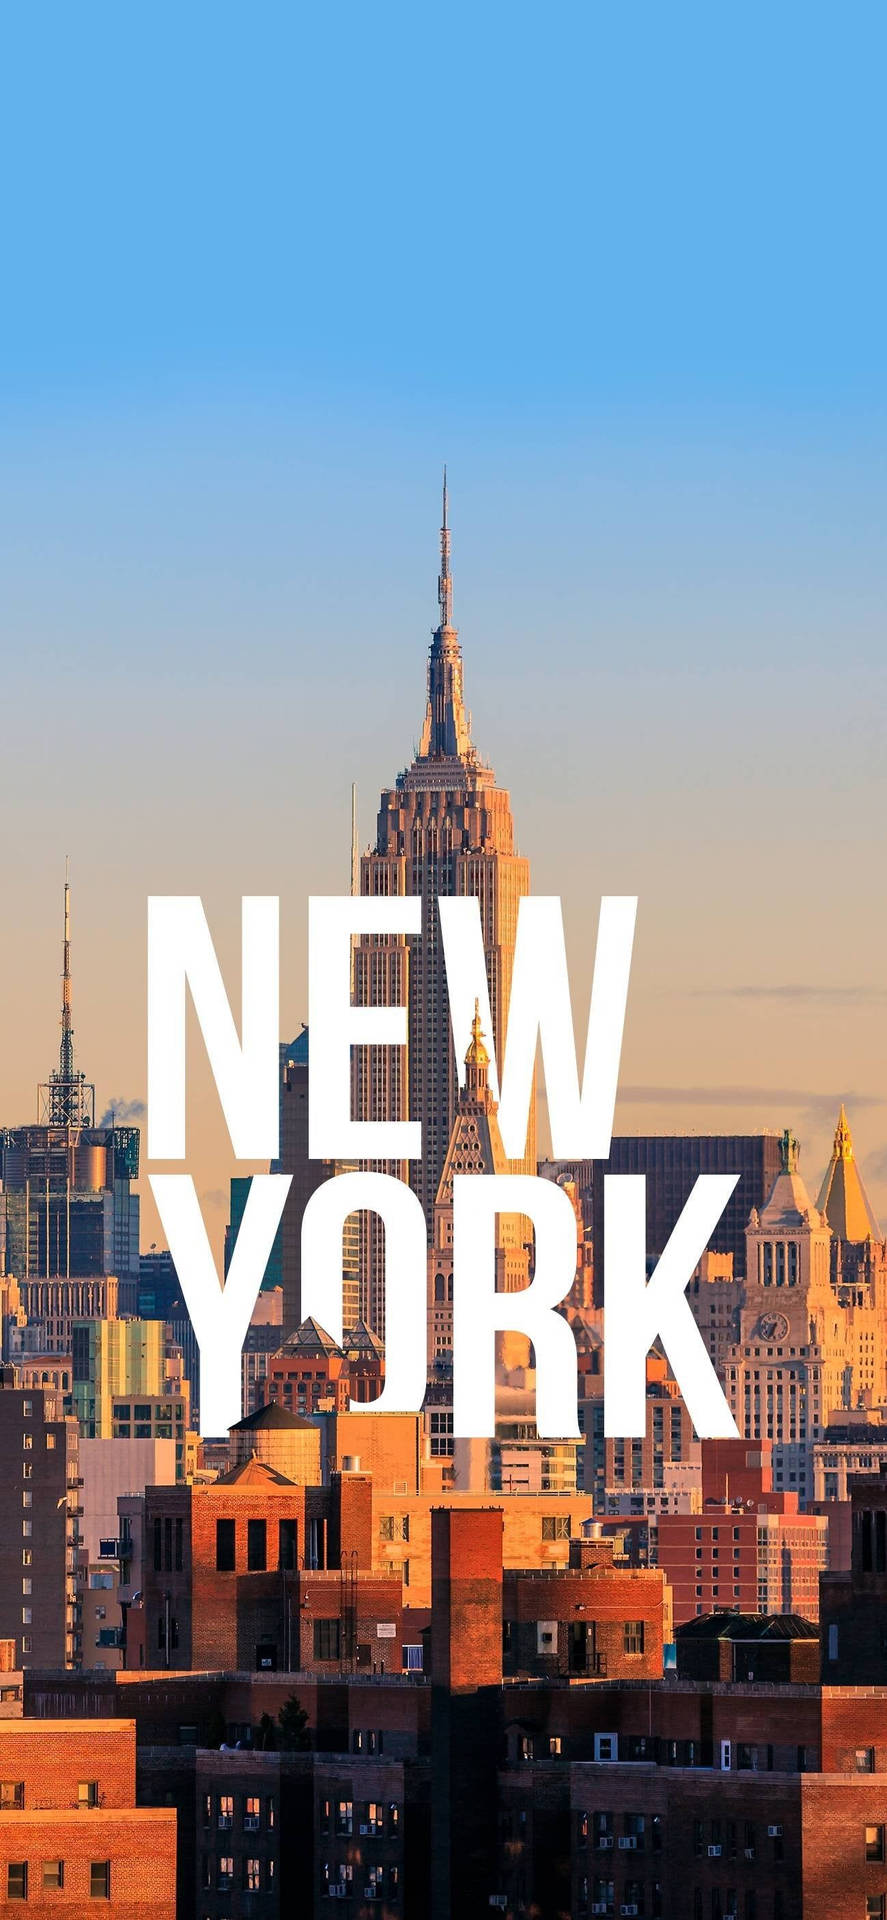 Text Over By New York iPhone-baggrunden Wallpaper